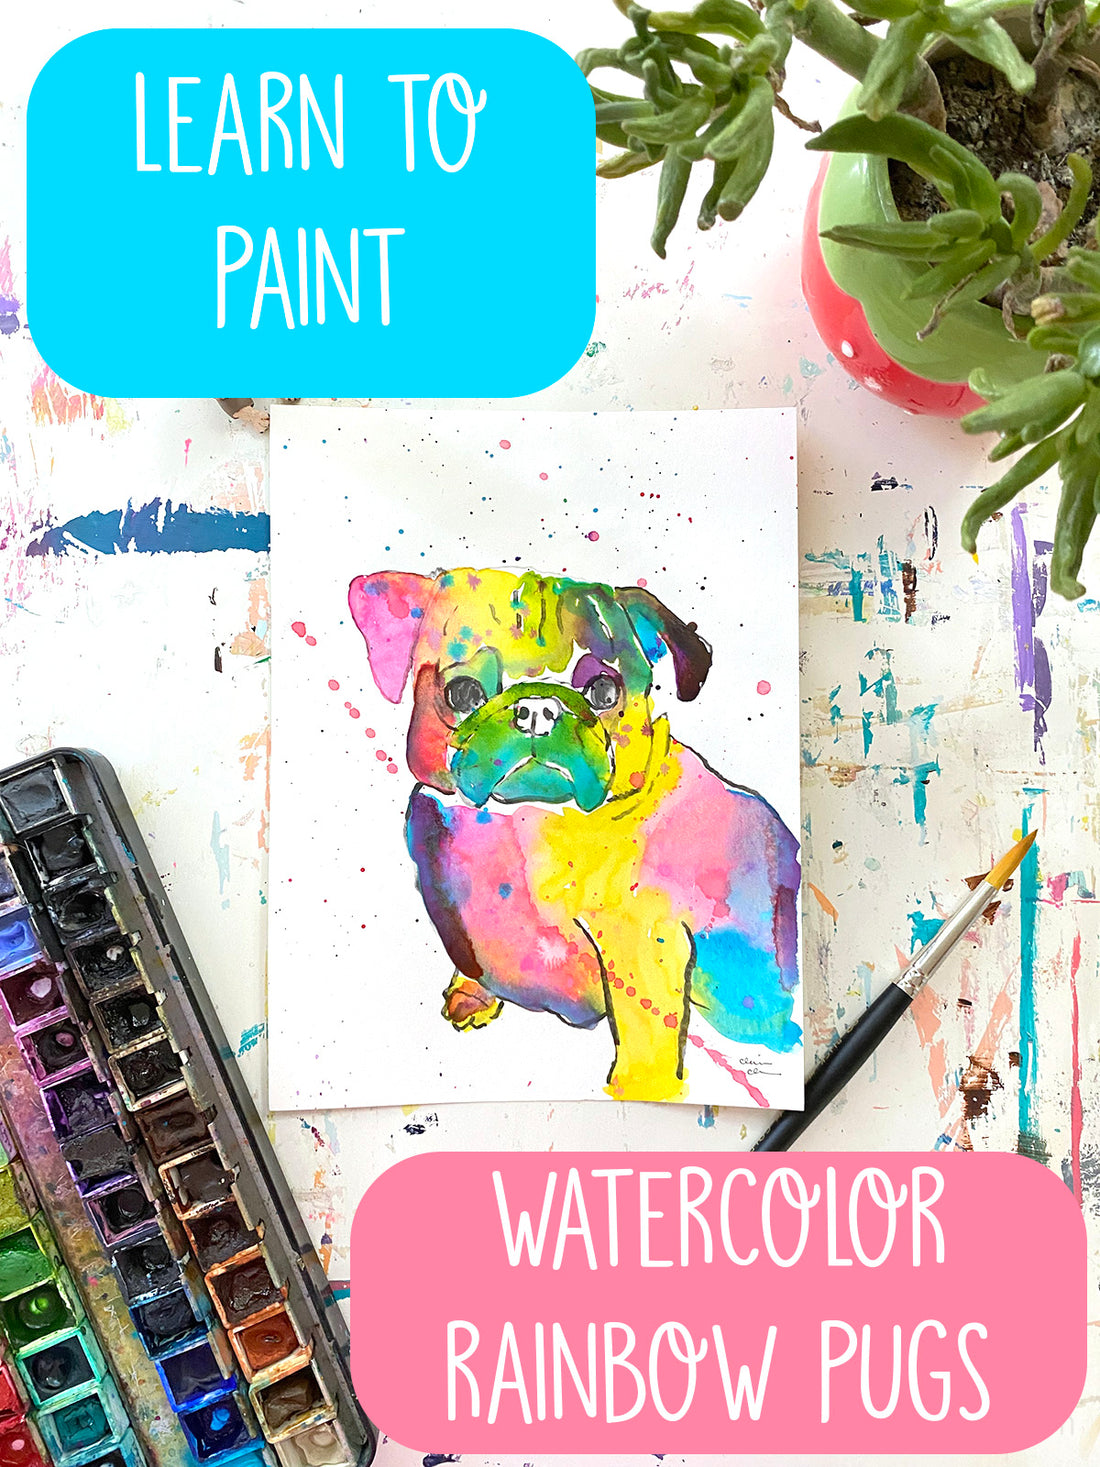 Introducing: Learn To Paint Watercolor Rainbow Pugs!